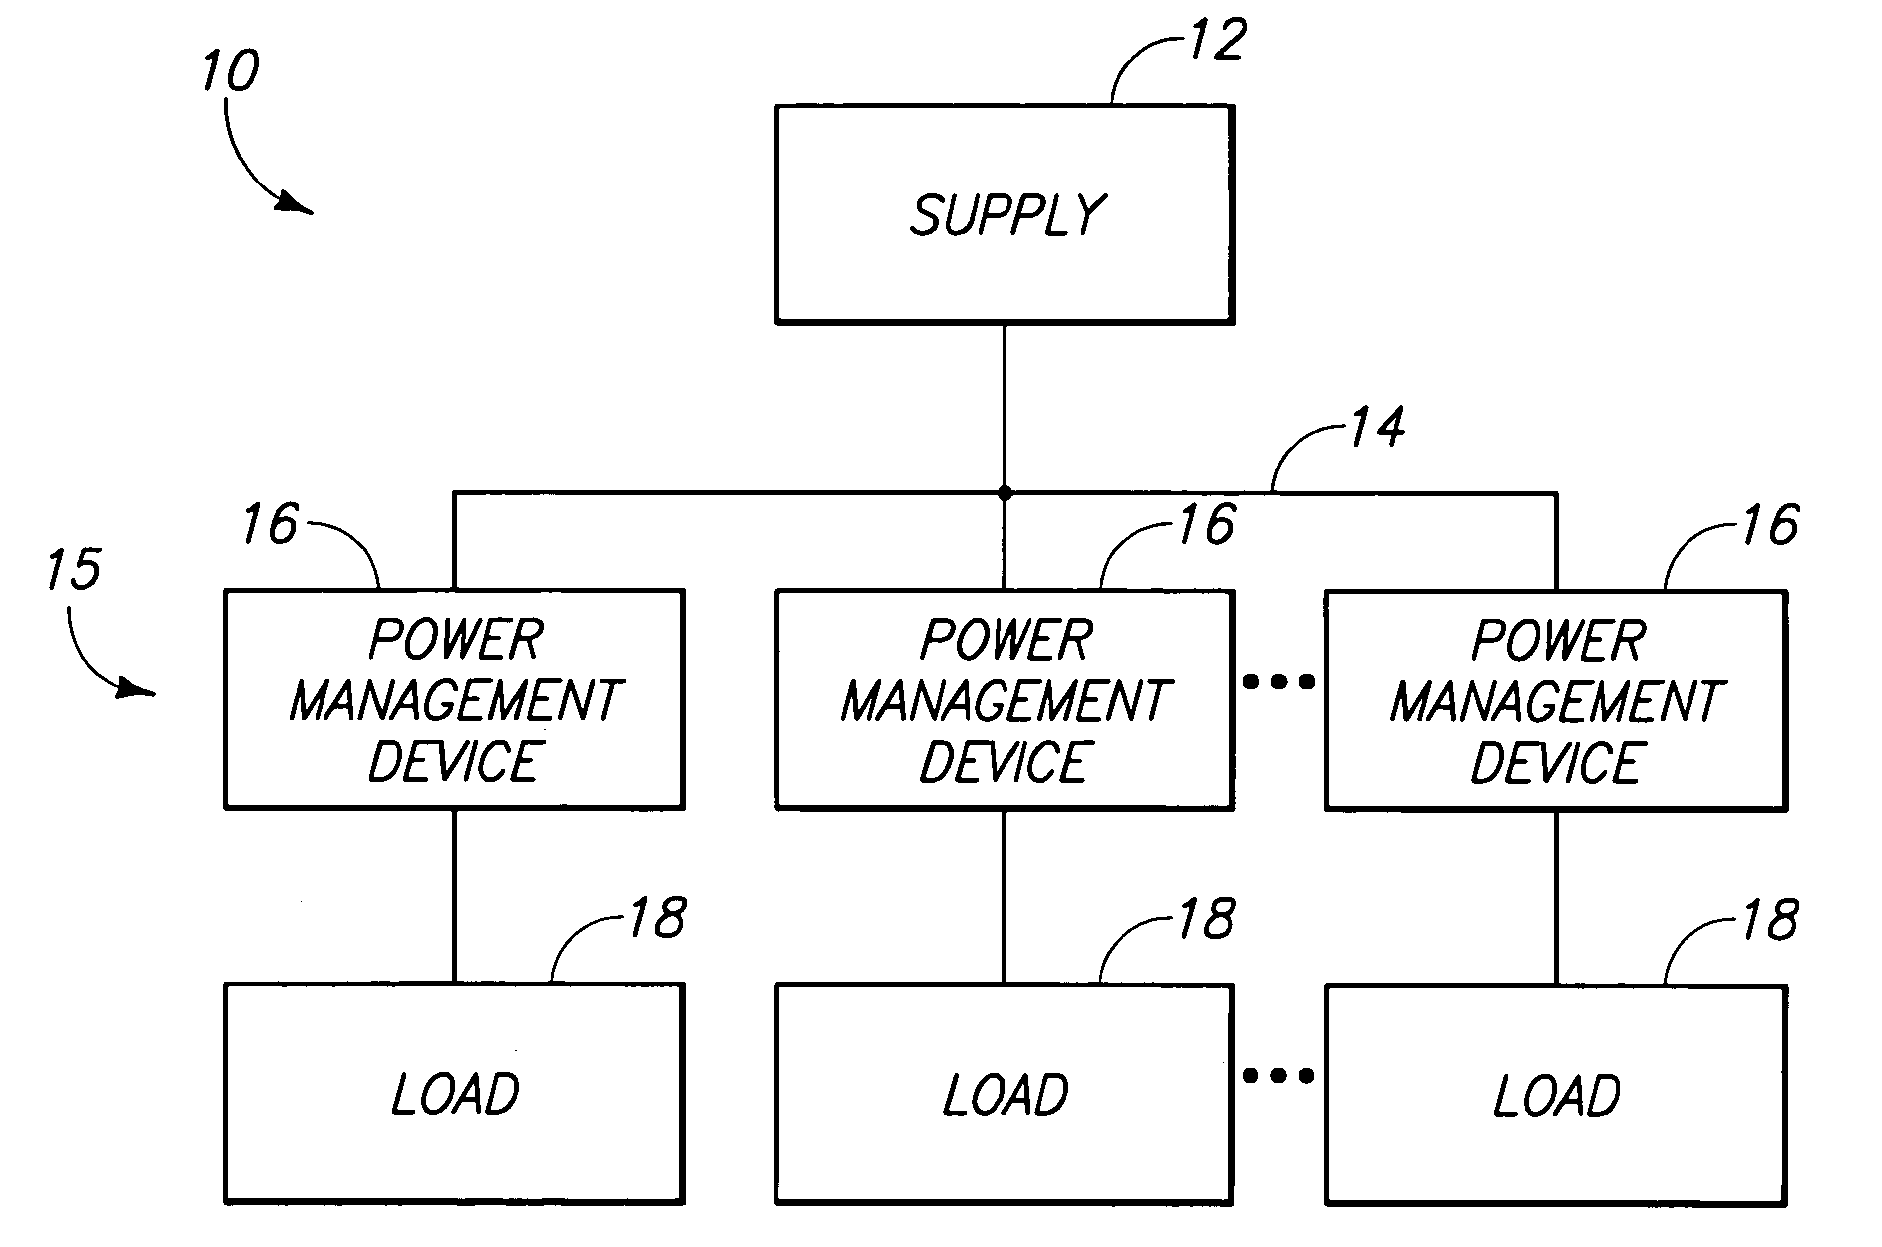 Electrical power distribution control methods, electrical energy demand monitoring methods, and power management devices